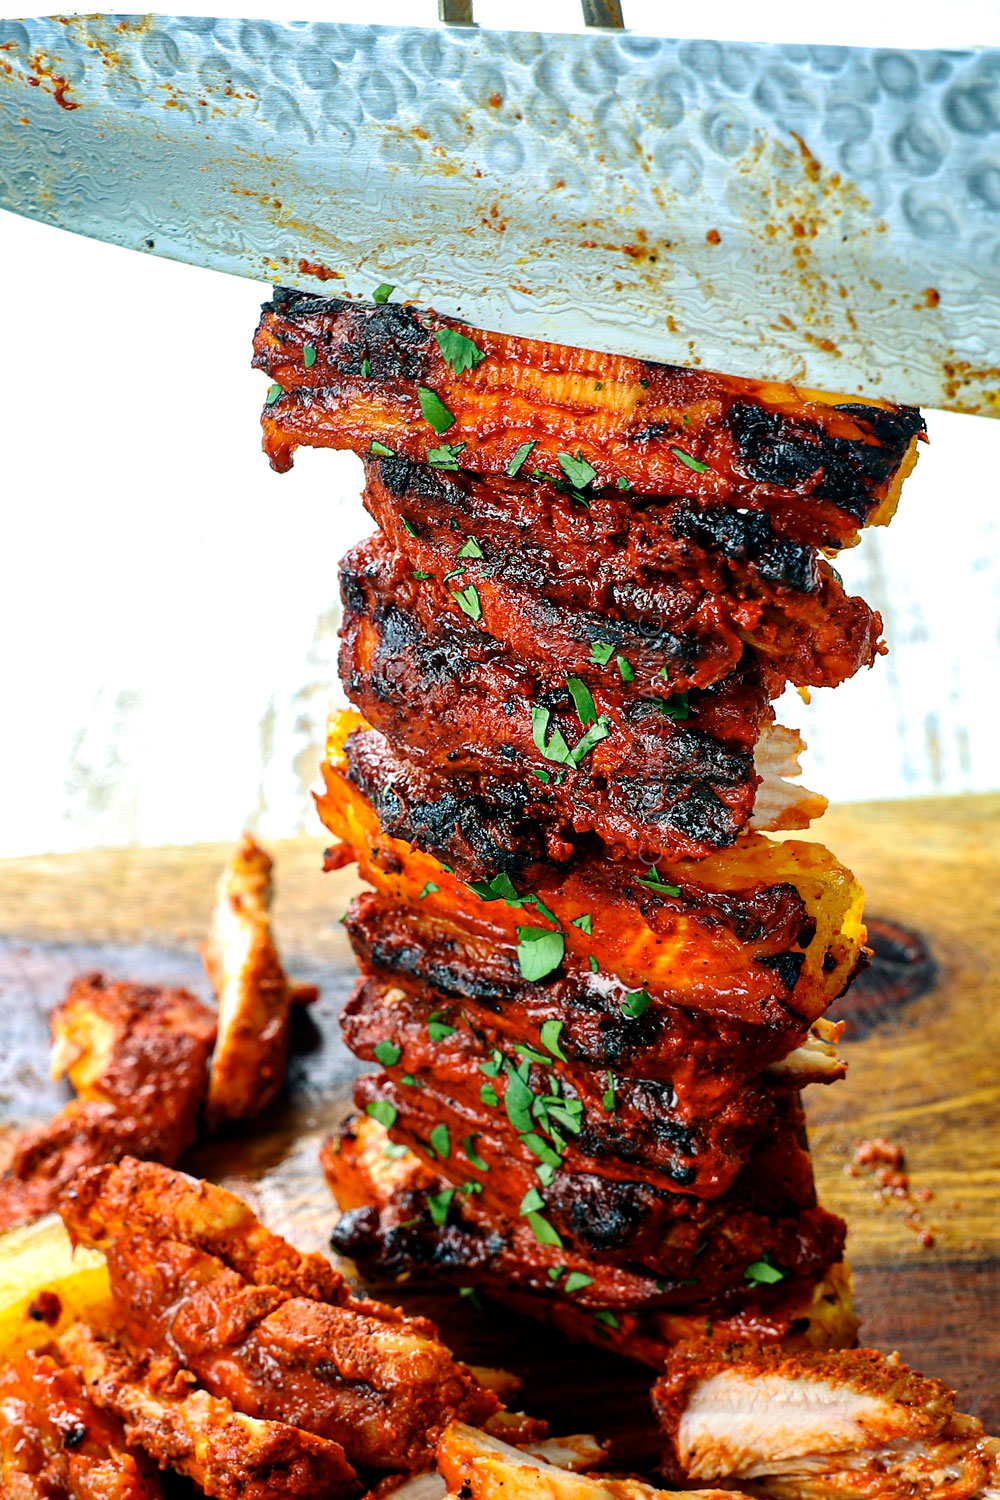 showing how to make chicken al pastor recipe by carving chicken skewers into thin slices